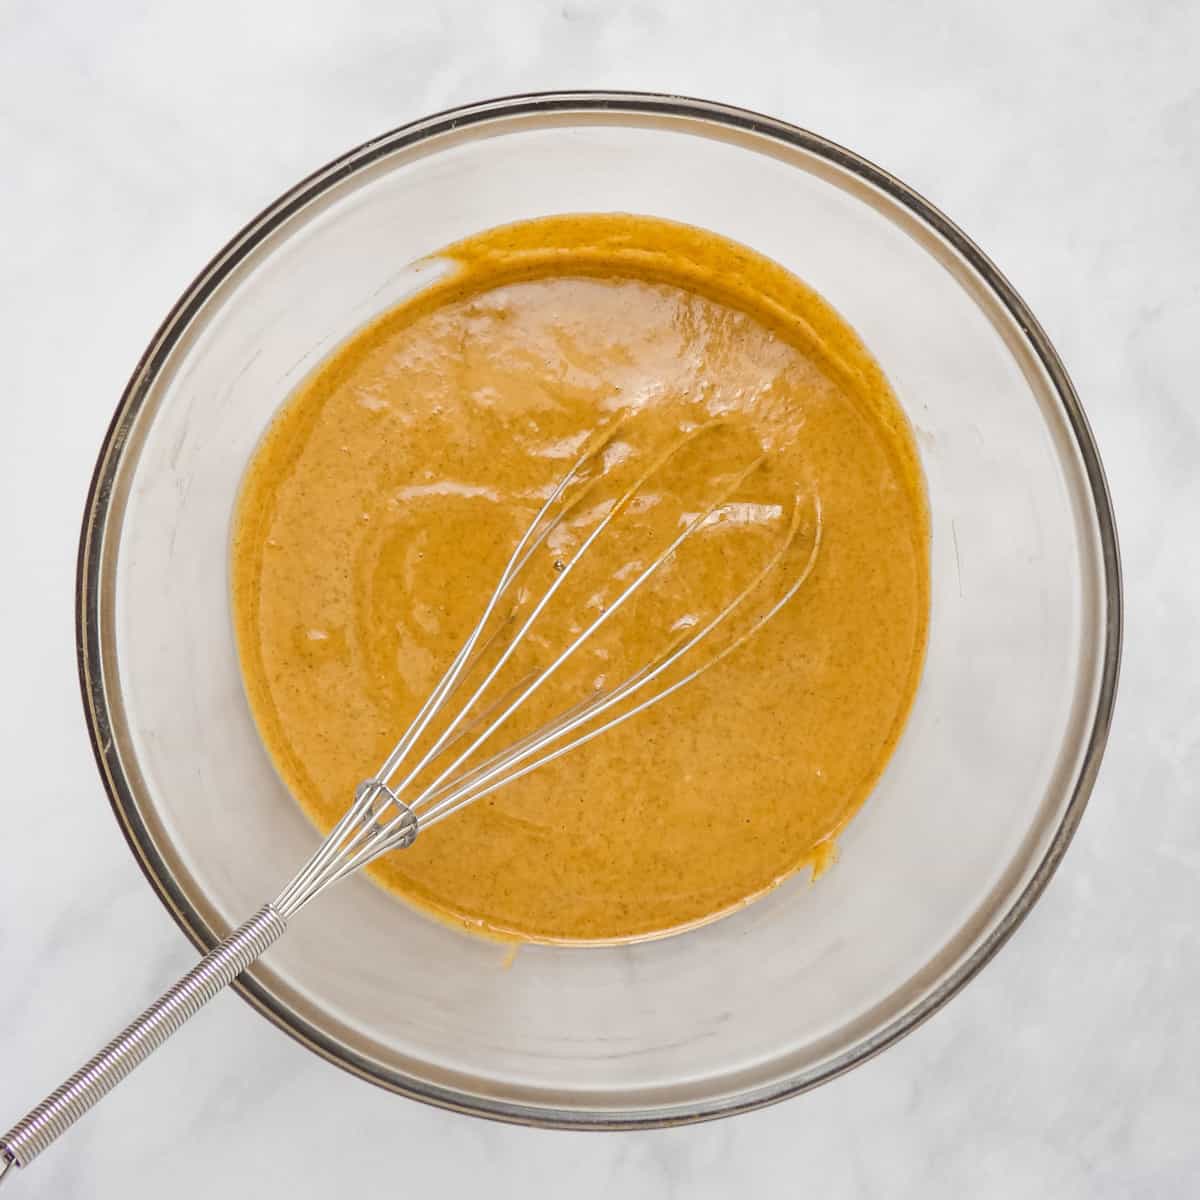 Whisking pumpkin pie filling ingredients together in a large glass mixing bowl.